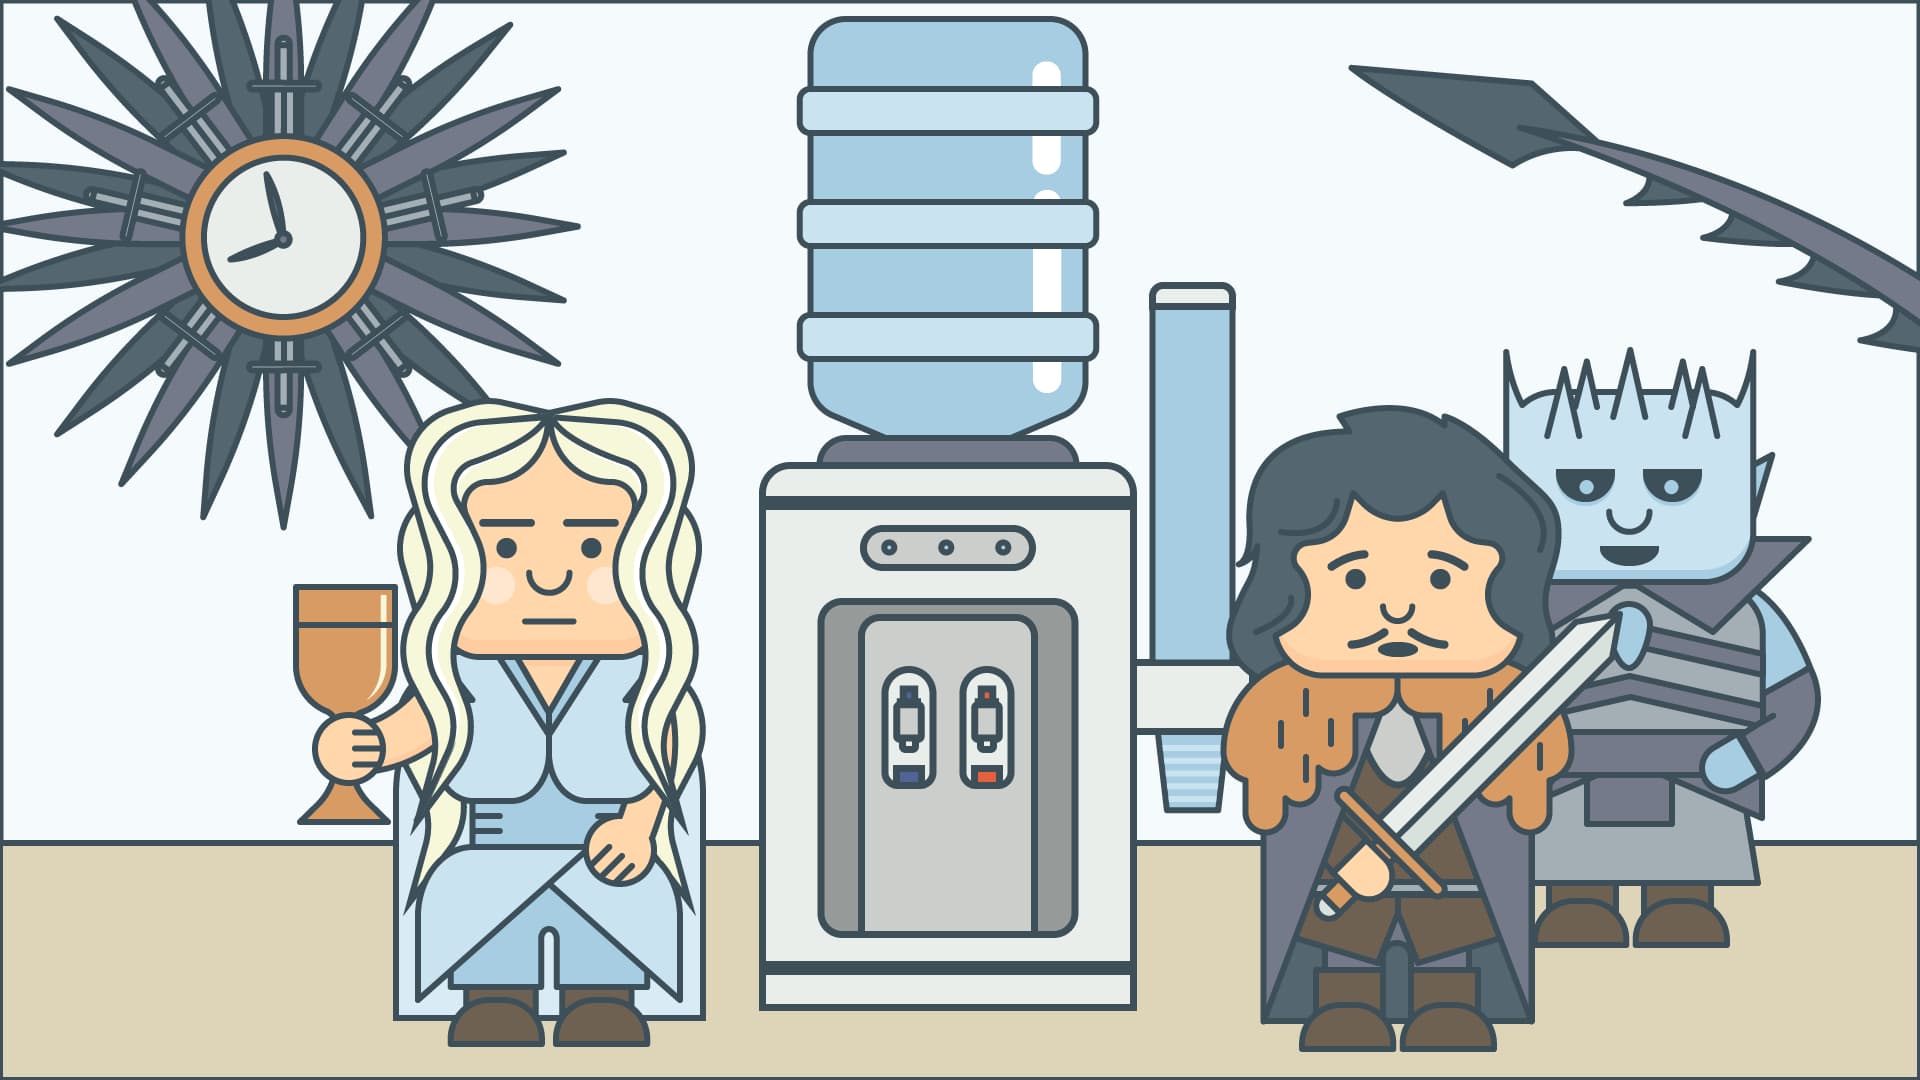 Game of Thrones water cooler illustration